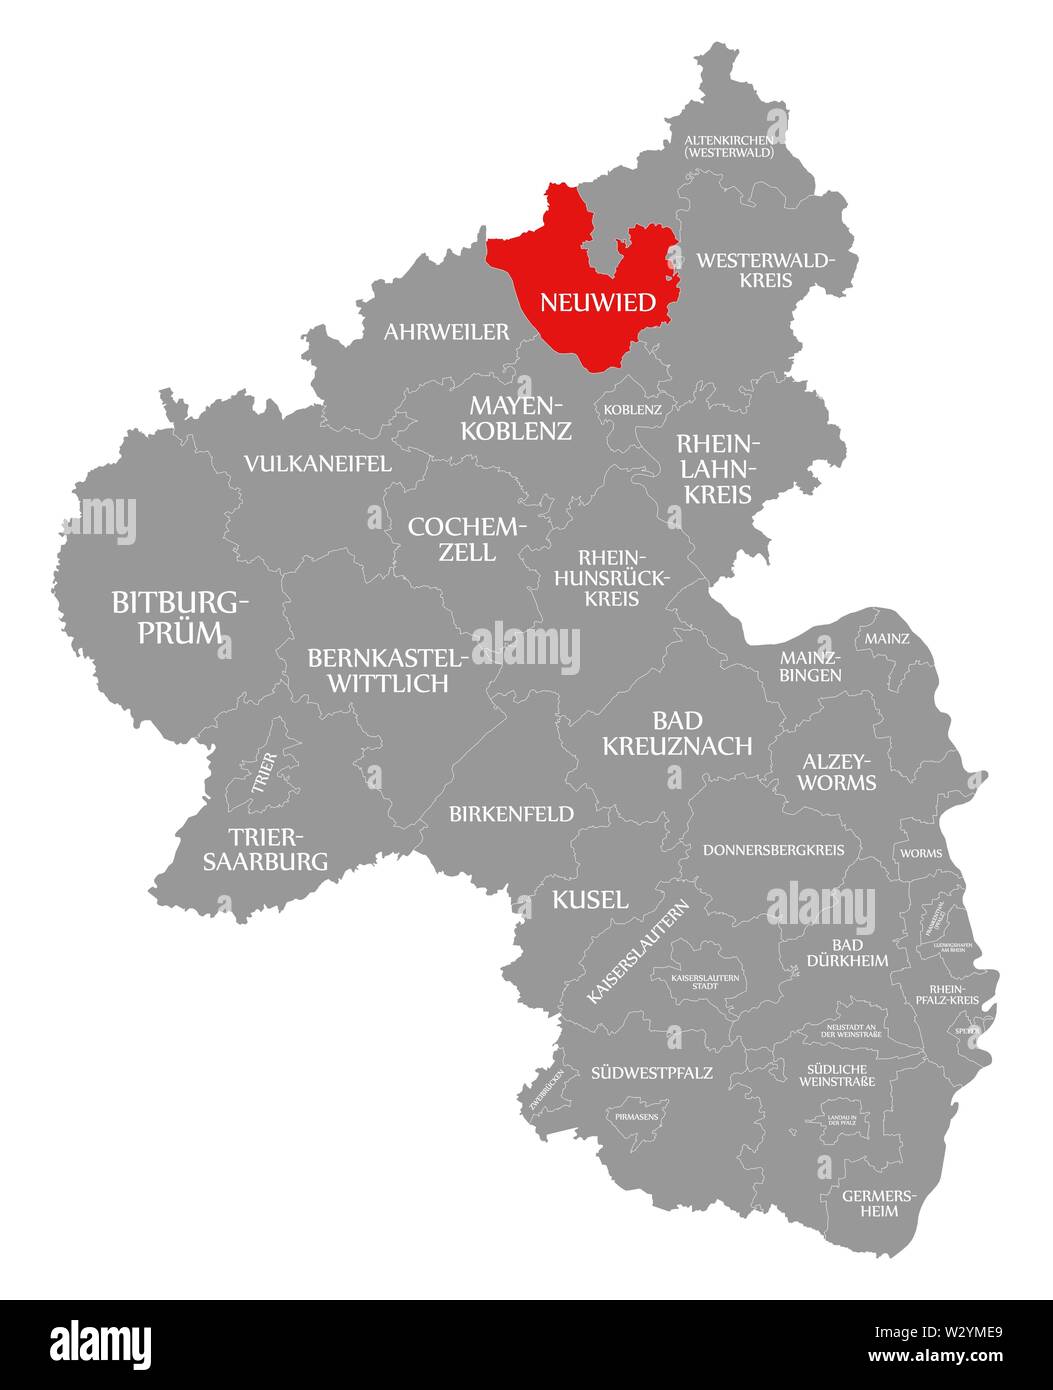 Neuwied red highlighted in map of Rhineland Palatinate DE Stock Photo